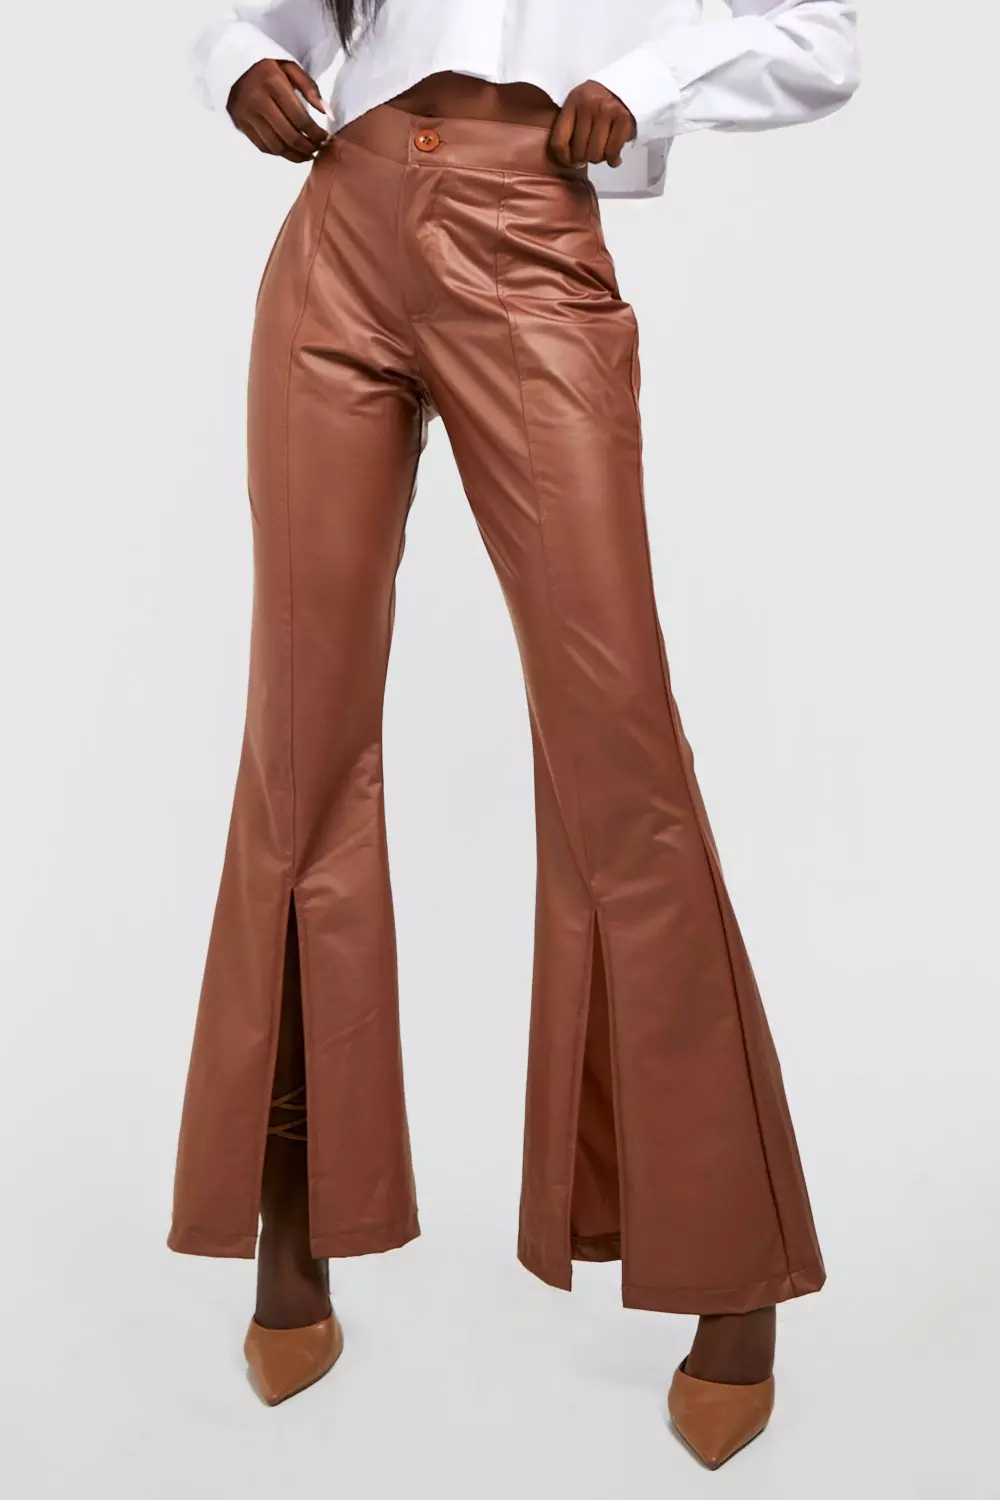 Men Bell Bottom Trousers Faux Leather Flared Pants Casual Office